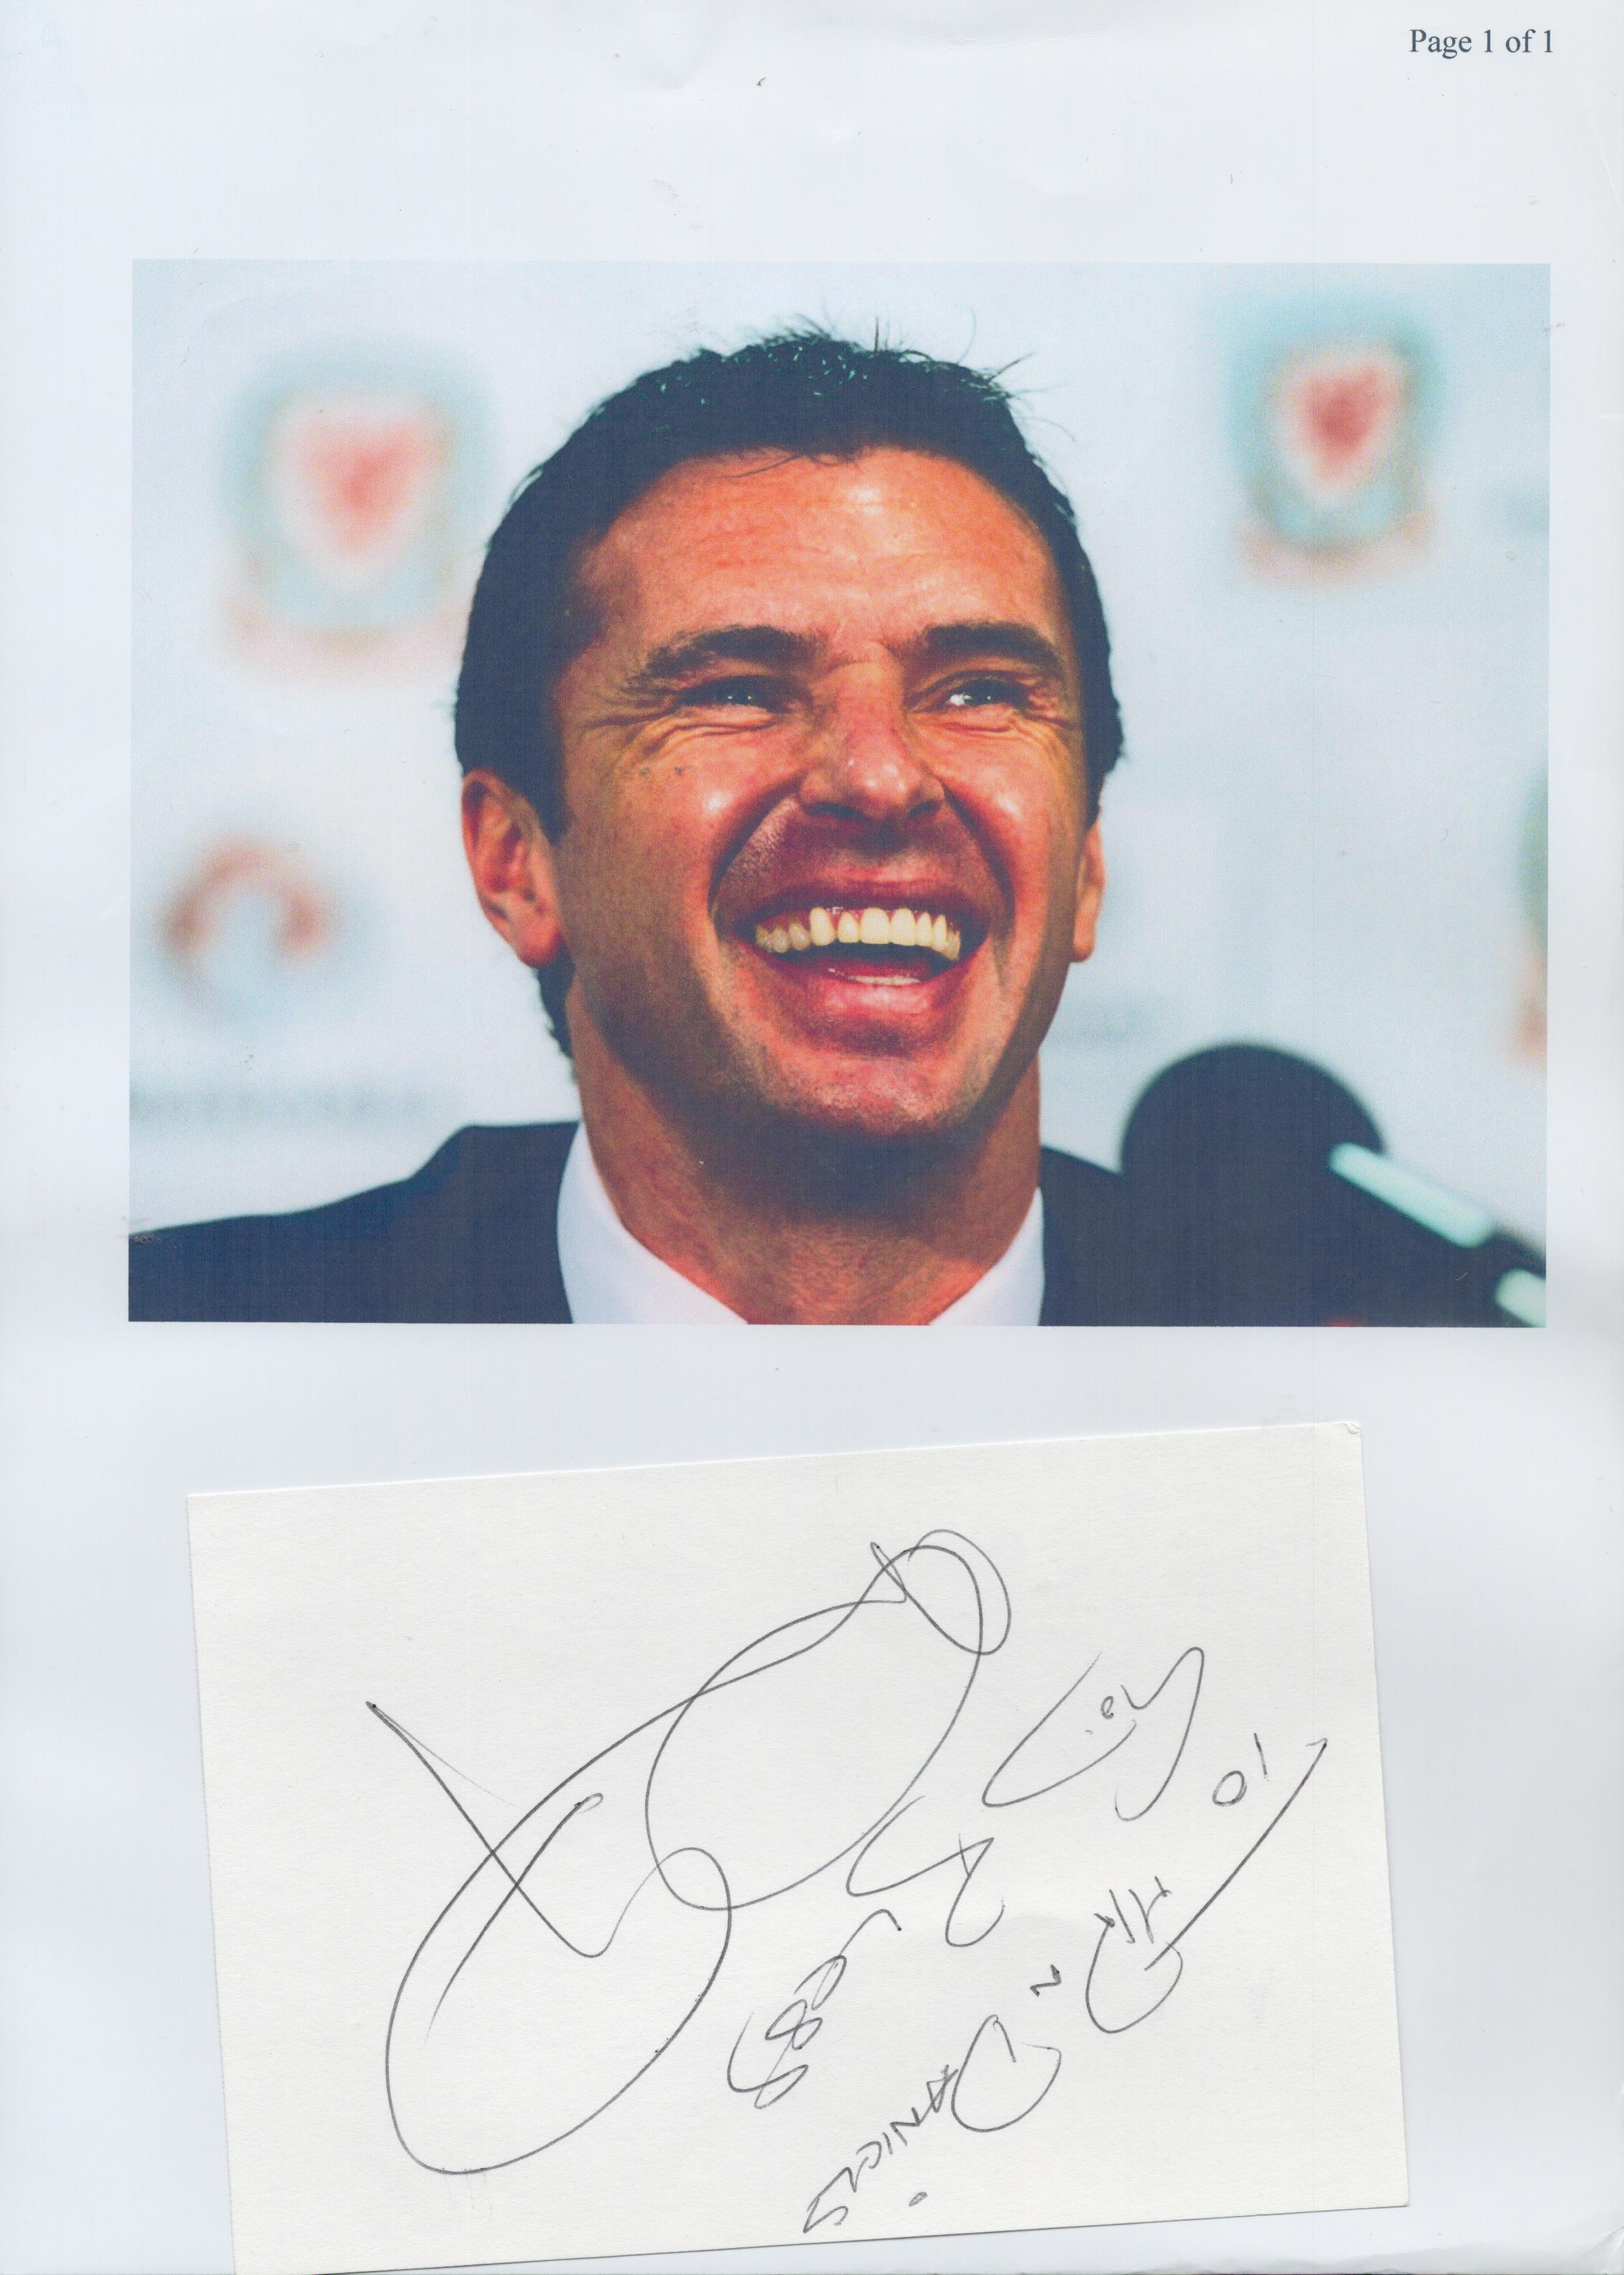 Football Legend Gary Speed Signed Signature Piece with Colour Photo Included. Dedicated. Good